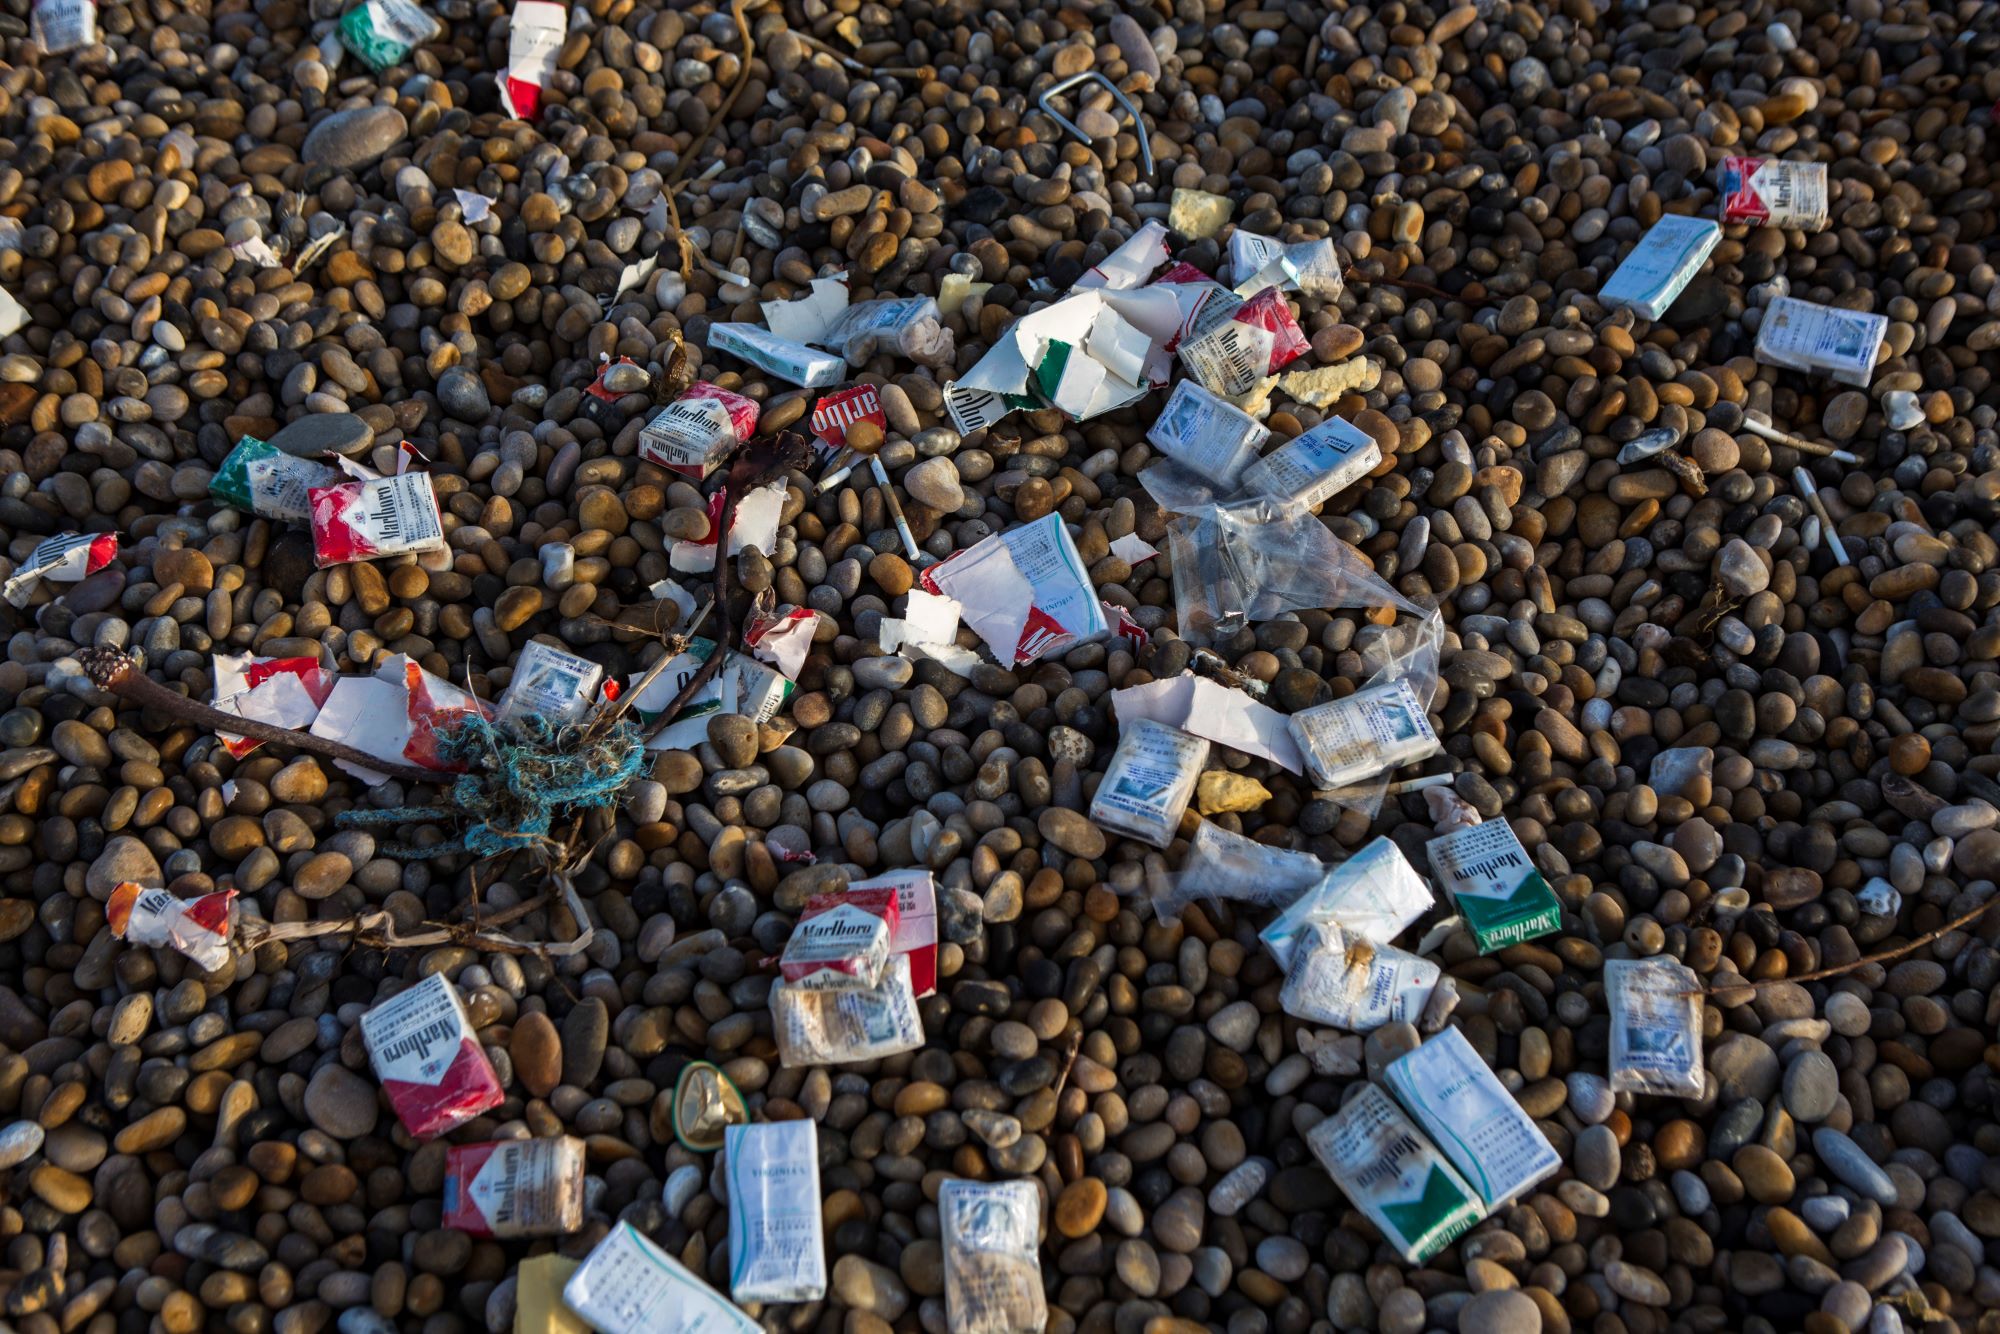 Cigarette packets and other trash washed up on Chesil Beach after a cargo ship accident